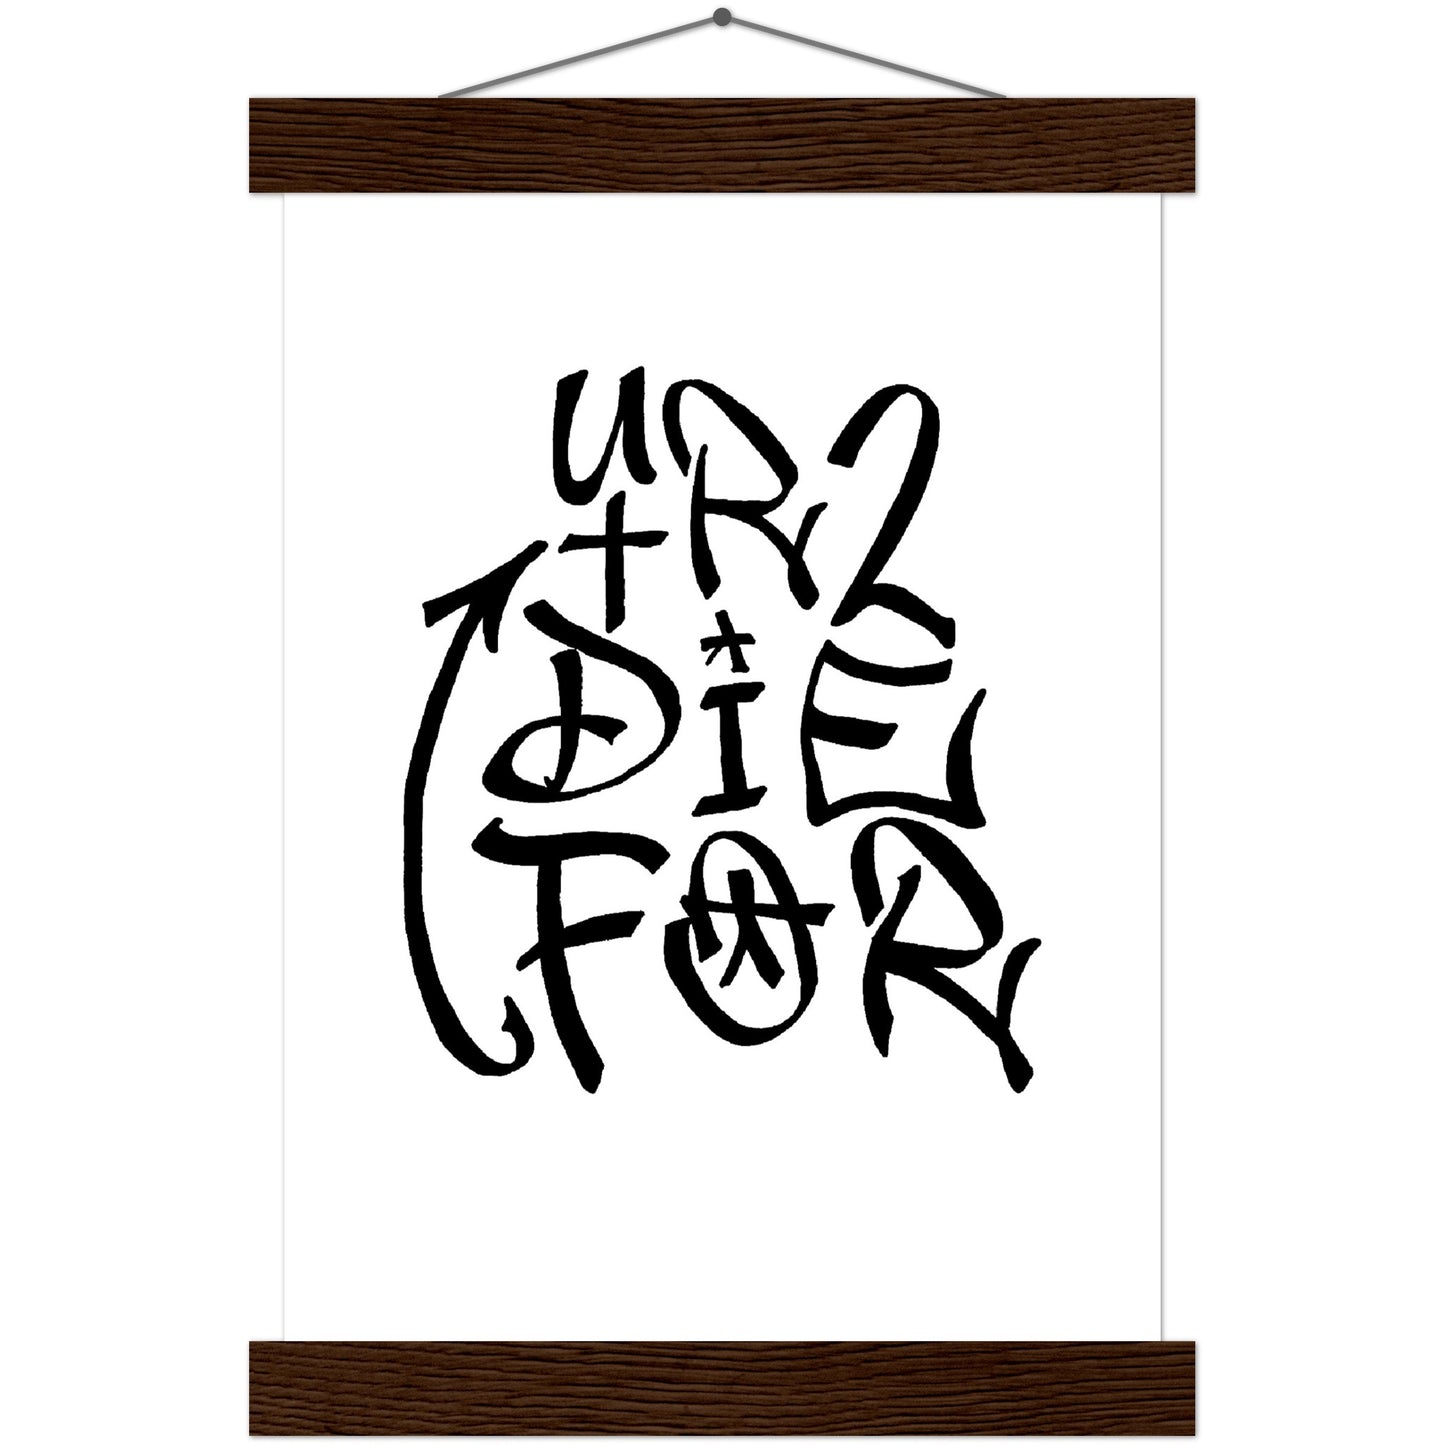 UR2DieFor - A4 Premium Semi-Glossy Paper Poster with Hanger